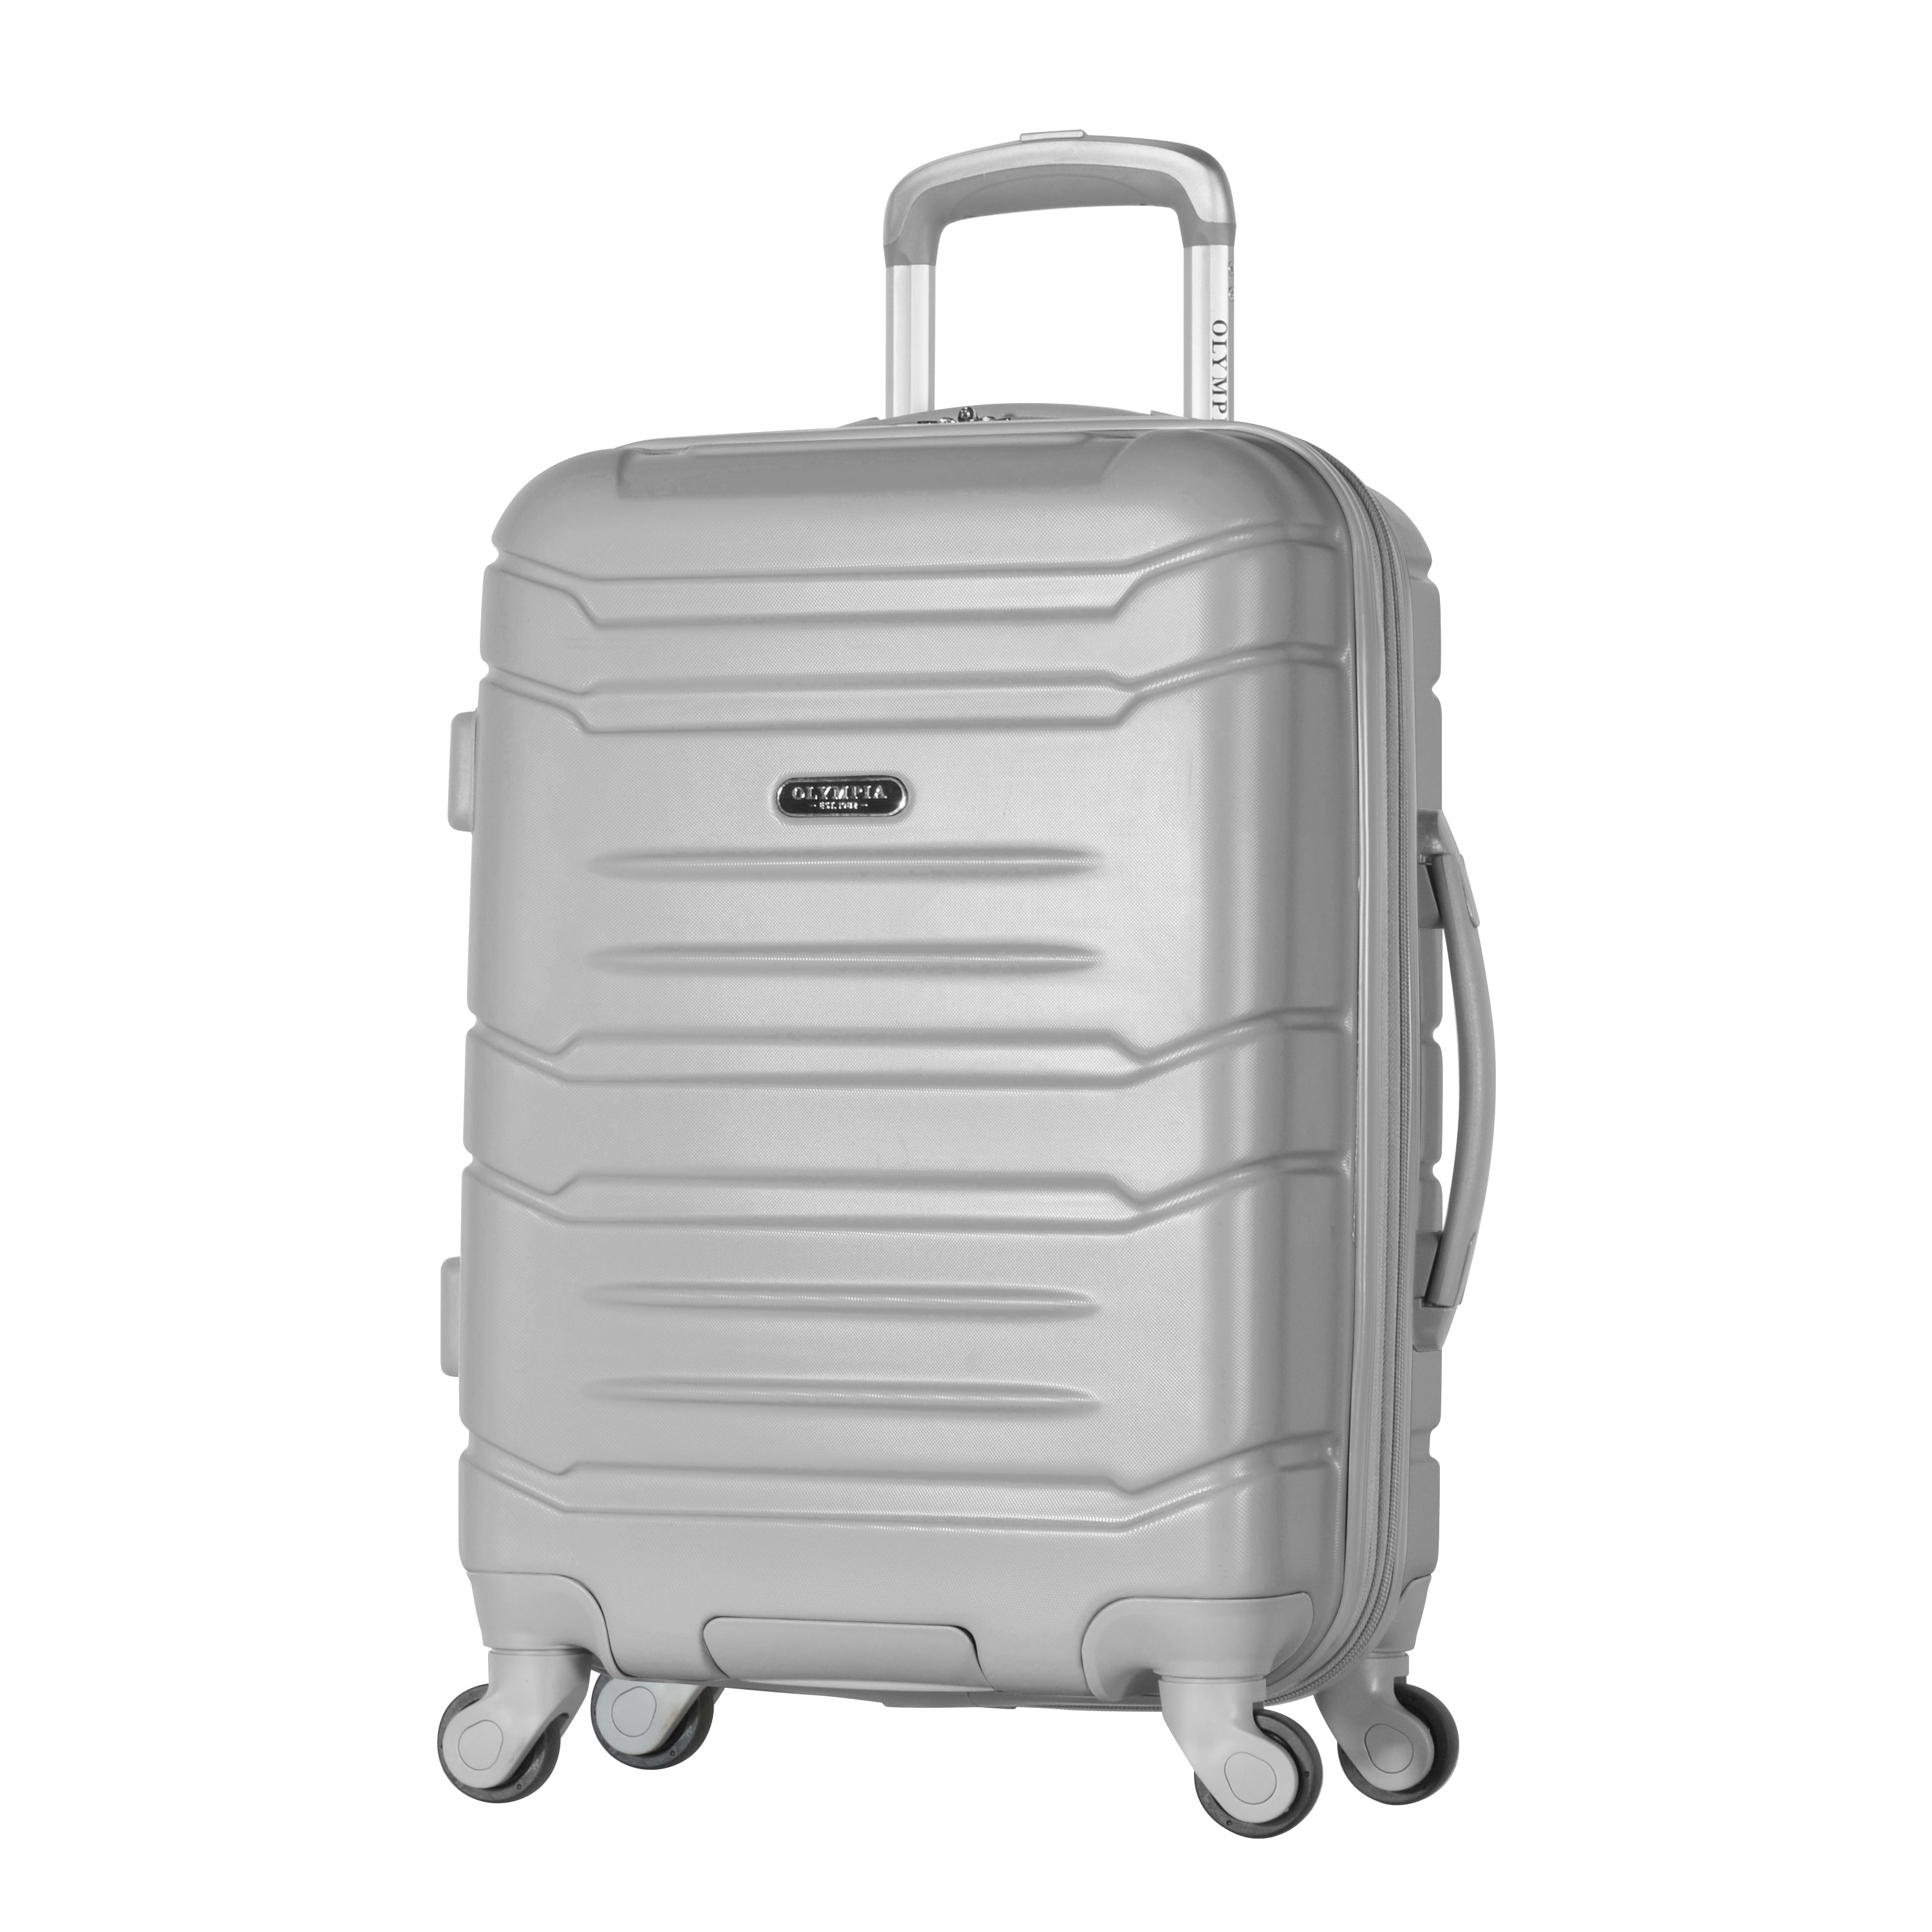 Olympia Denmark 21-Inch Lightweight Expandable Carry-On